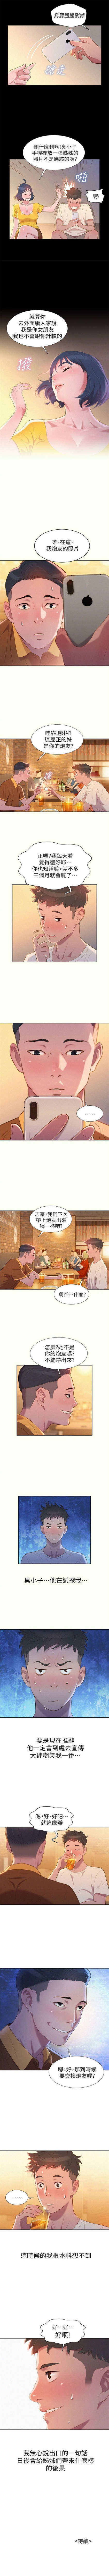 Gay Trimmed 漂亮幹姐姐 1-101 官方中文（連載中） Best Blowjobs Ever - Page 8